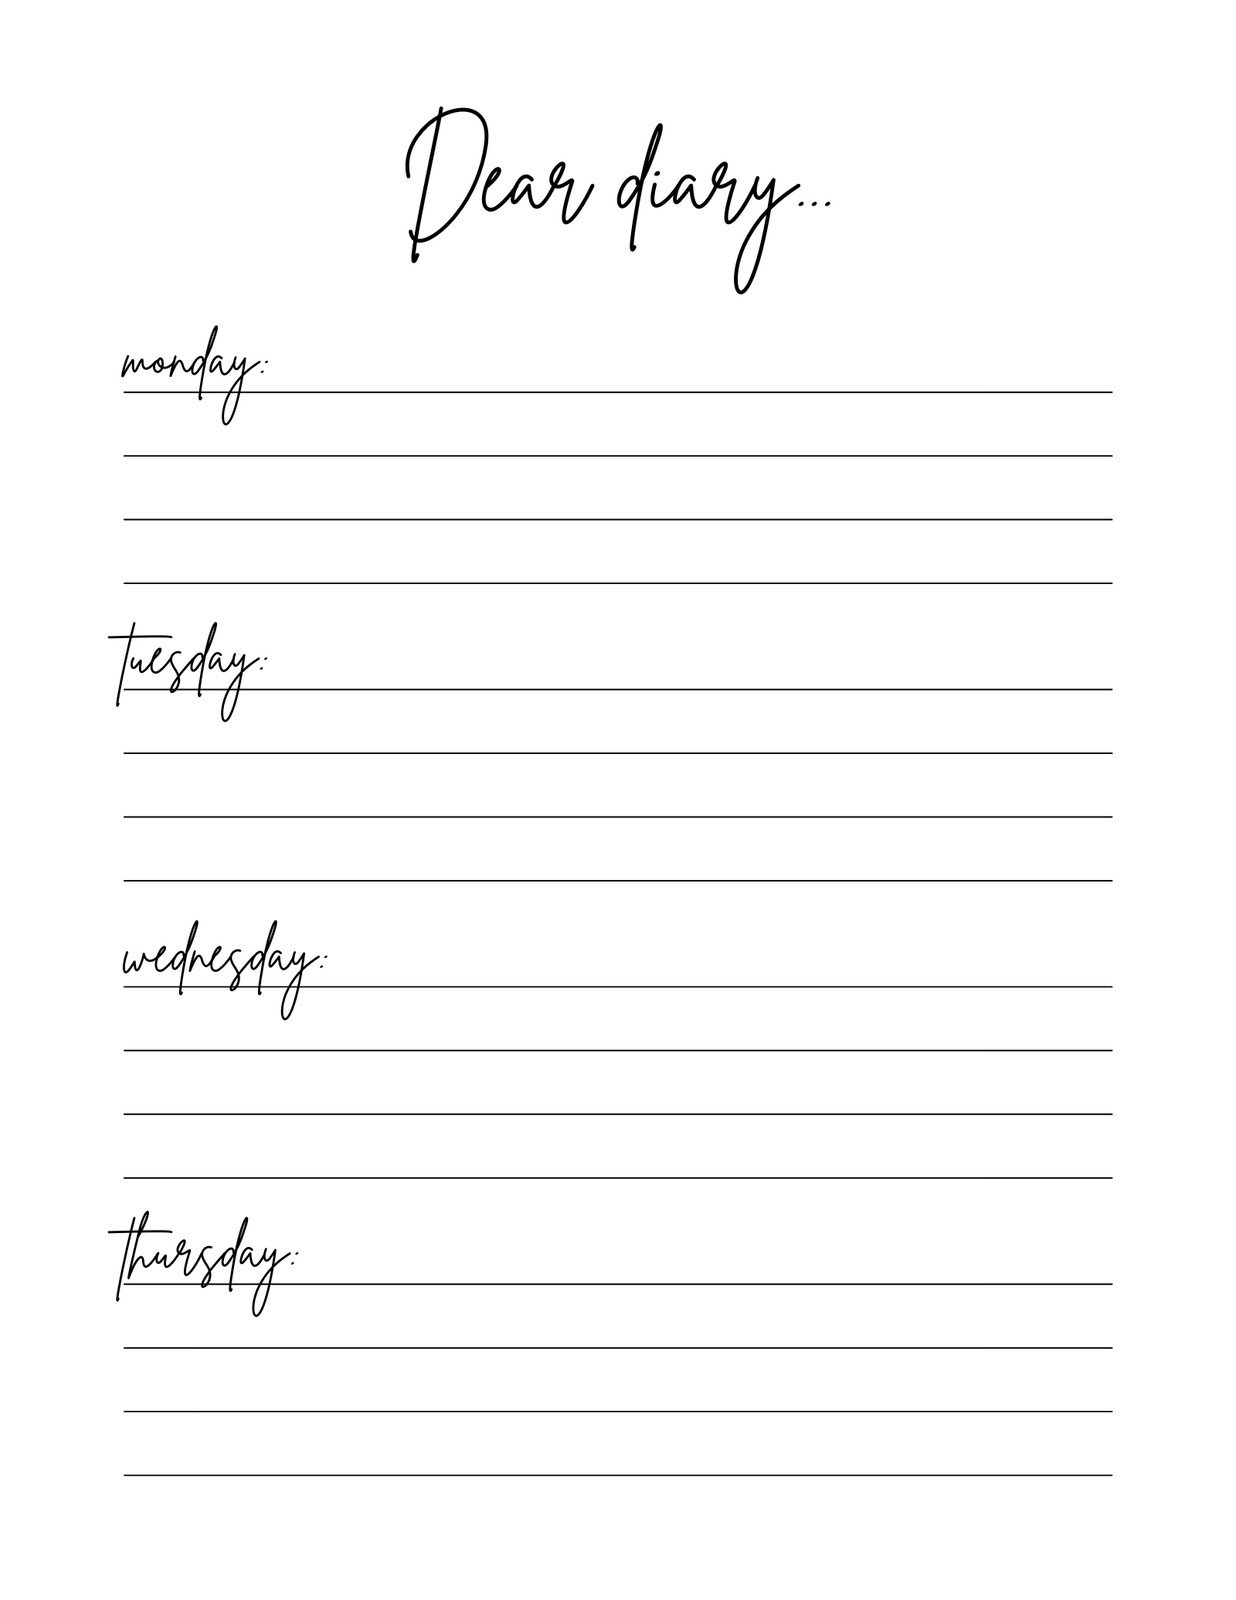 Free Printable Diary Templates You Can Customize Canva 50% OFF